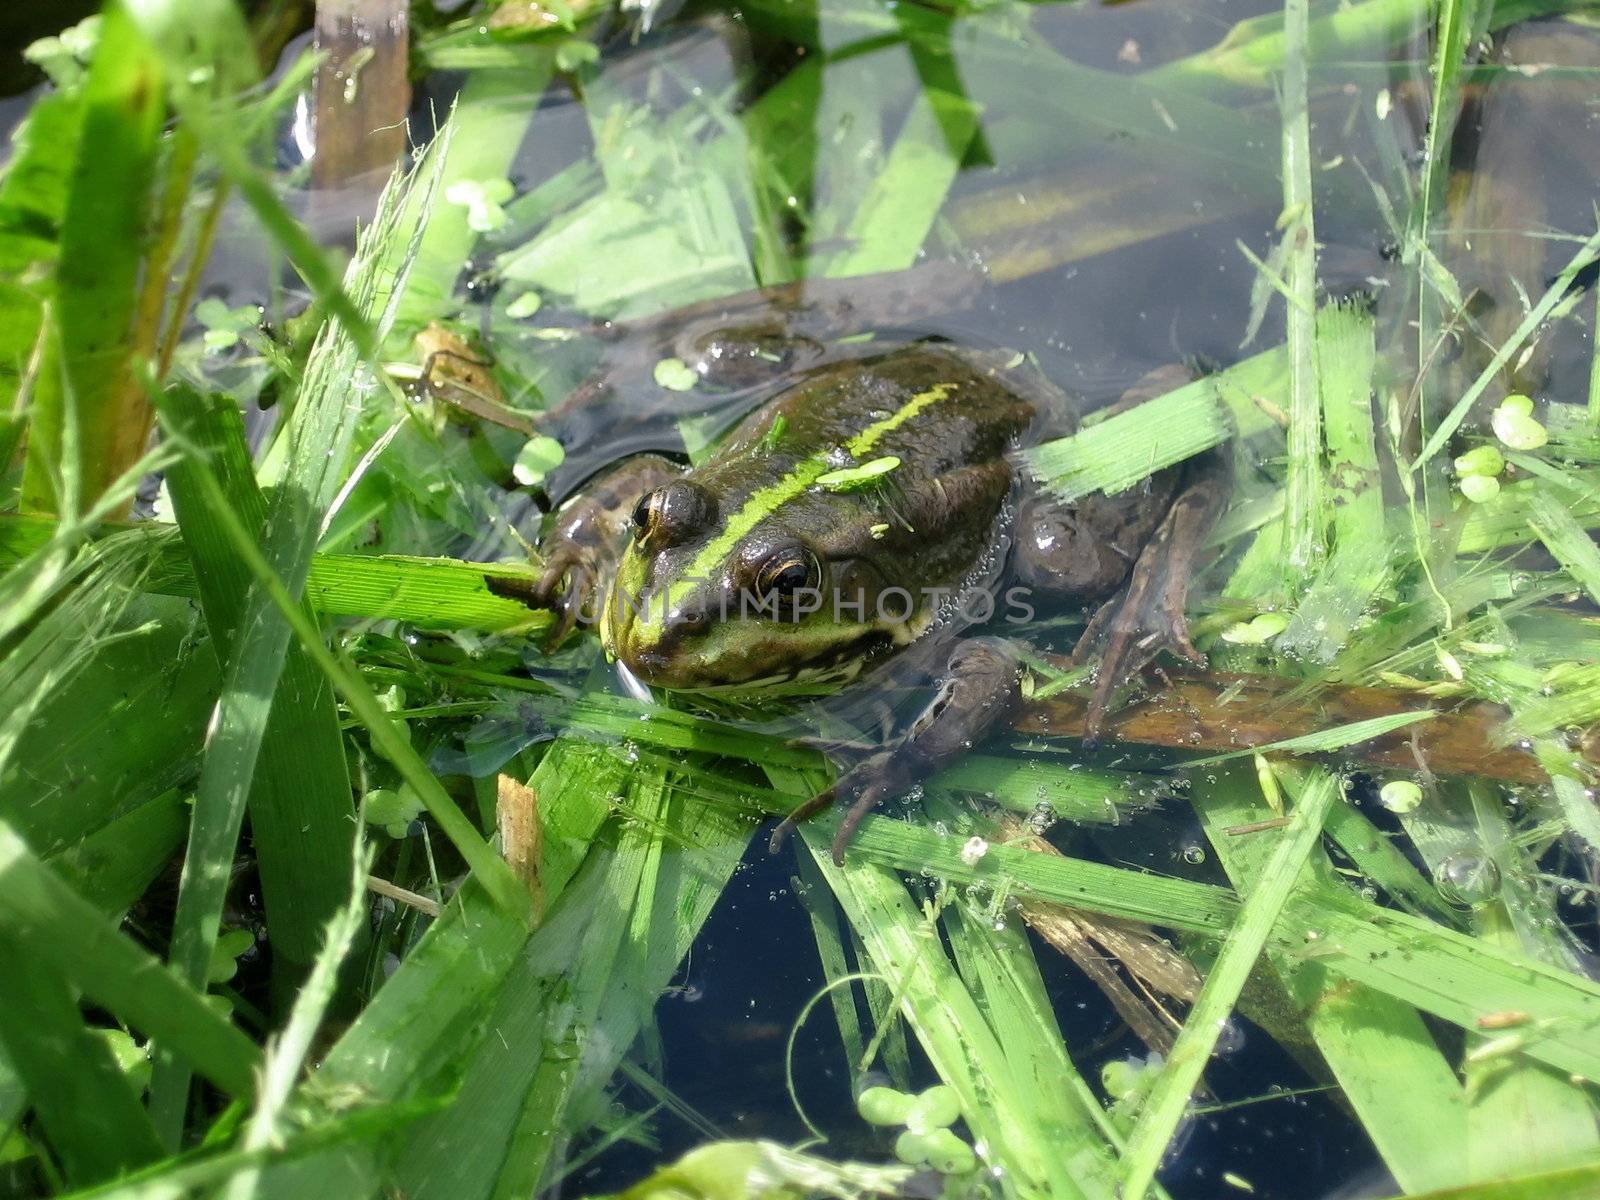 Green frog in pond by tomatto